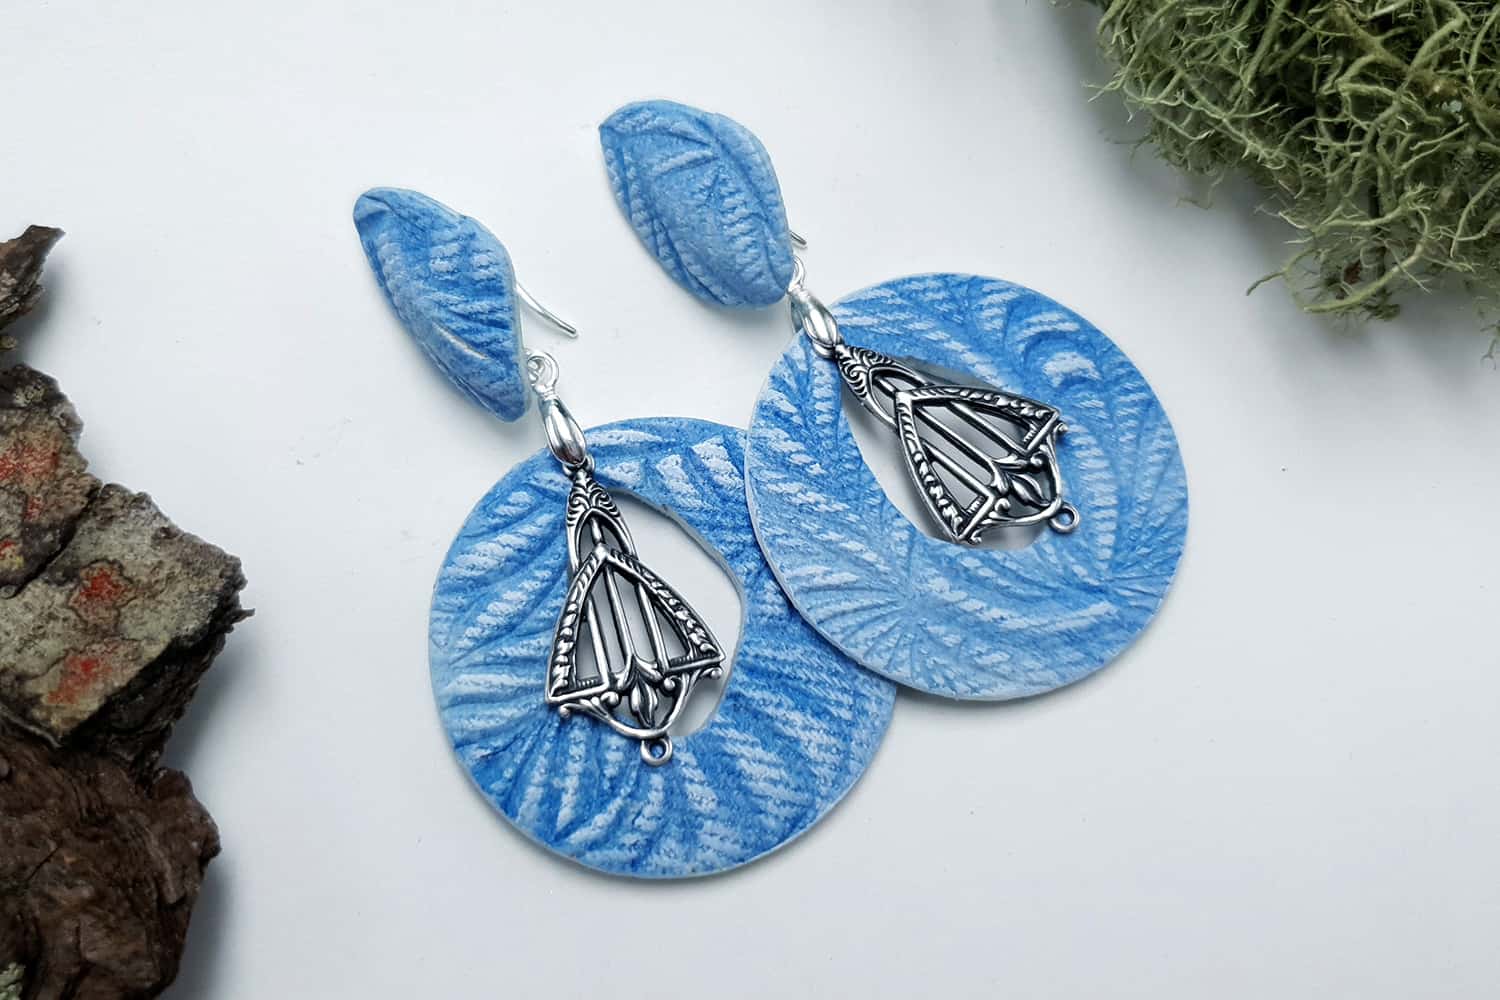 Jewelry from "Faux Jeans/Denim Fabric" course for your inspiration #11